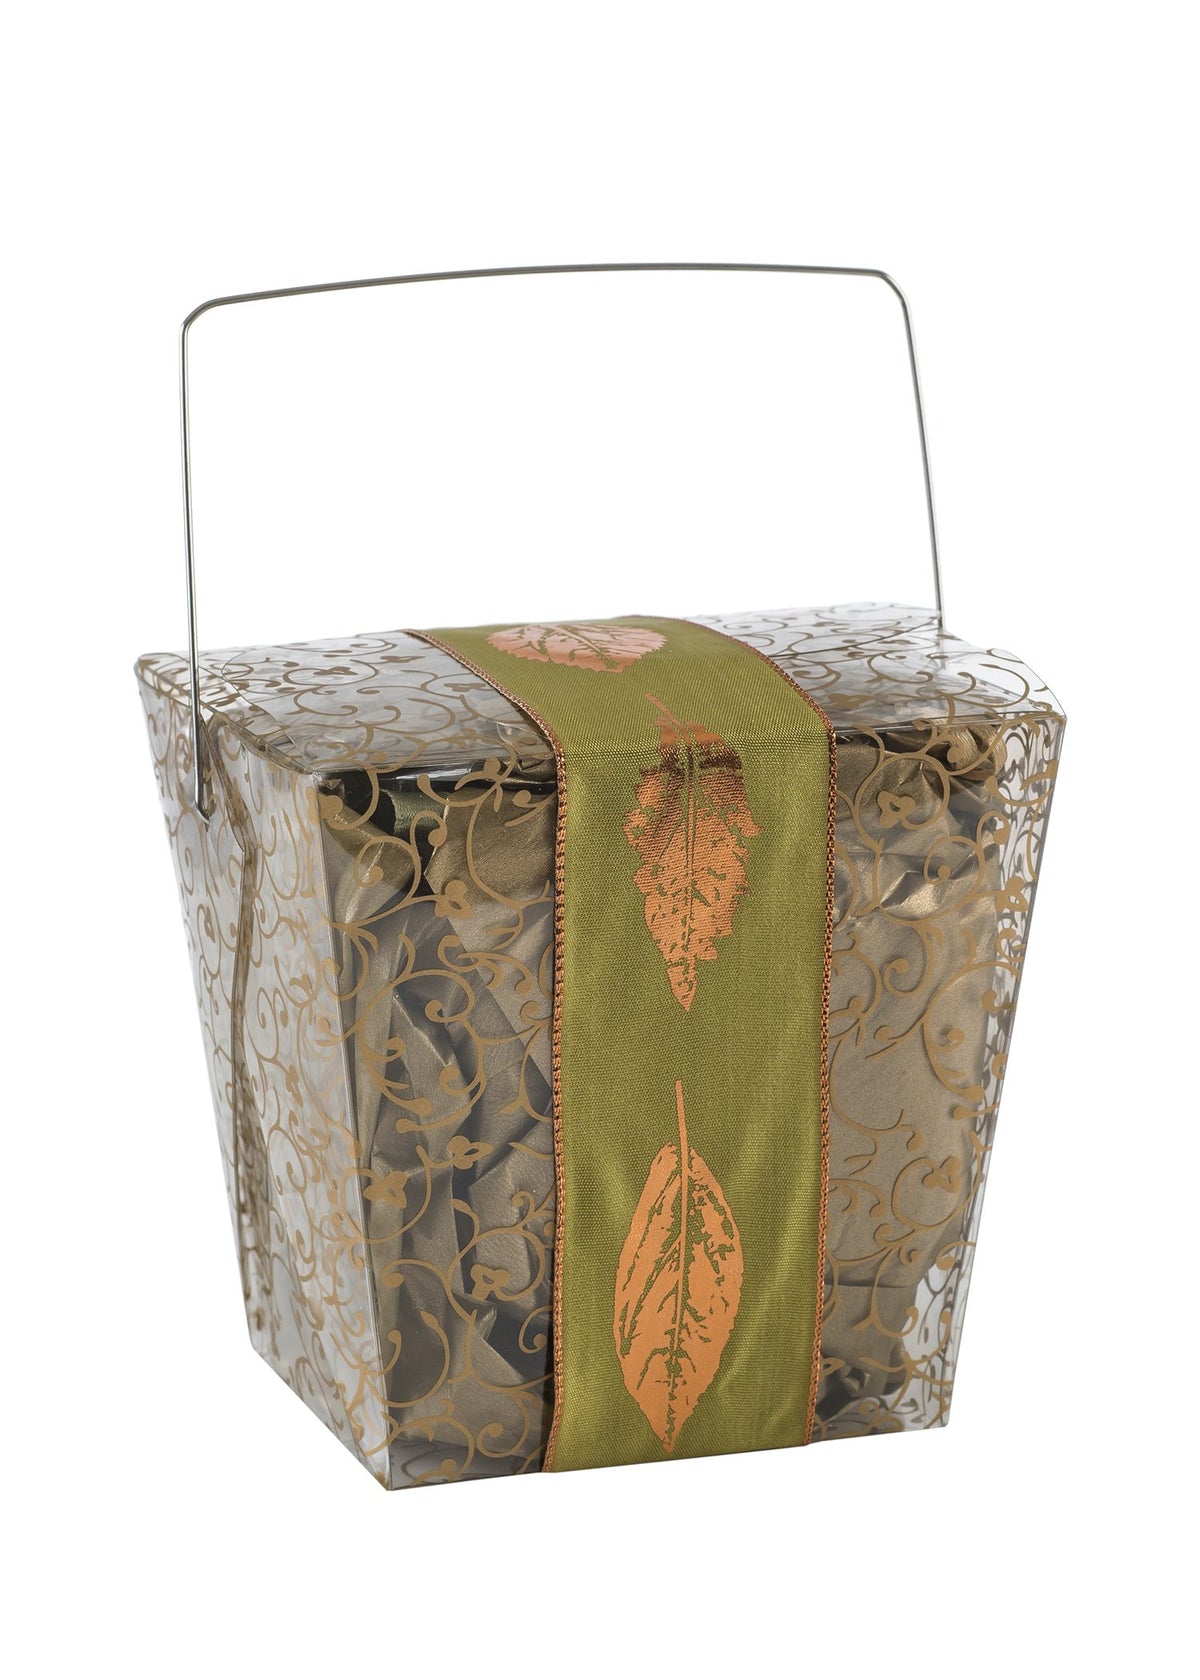 A Sonoma Lavender decorative gift box with metallic patterns and a handle, draped with an elegant orange ribbon featuring a eucalyptus design, isolated on a white background.